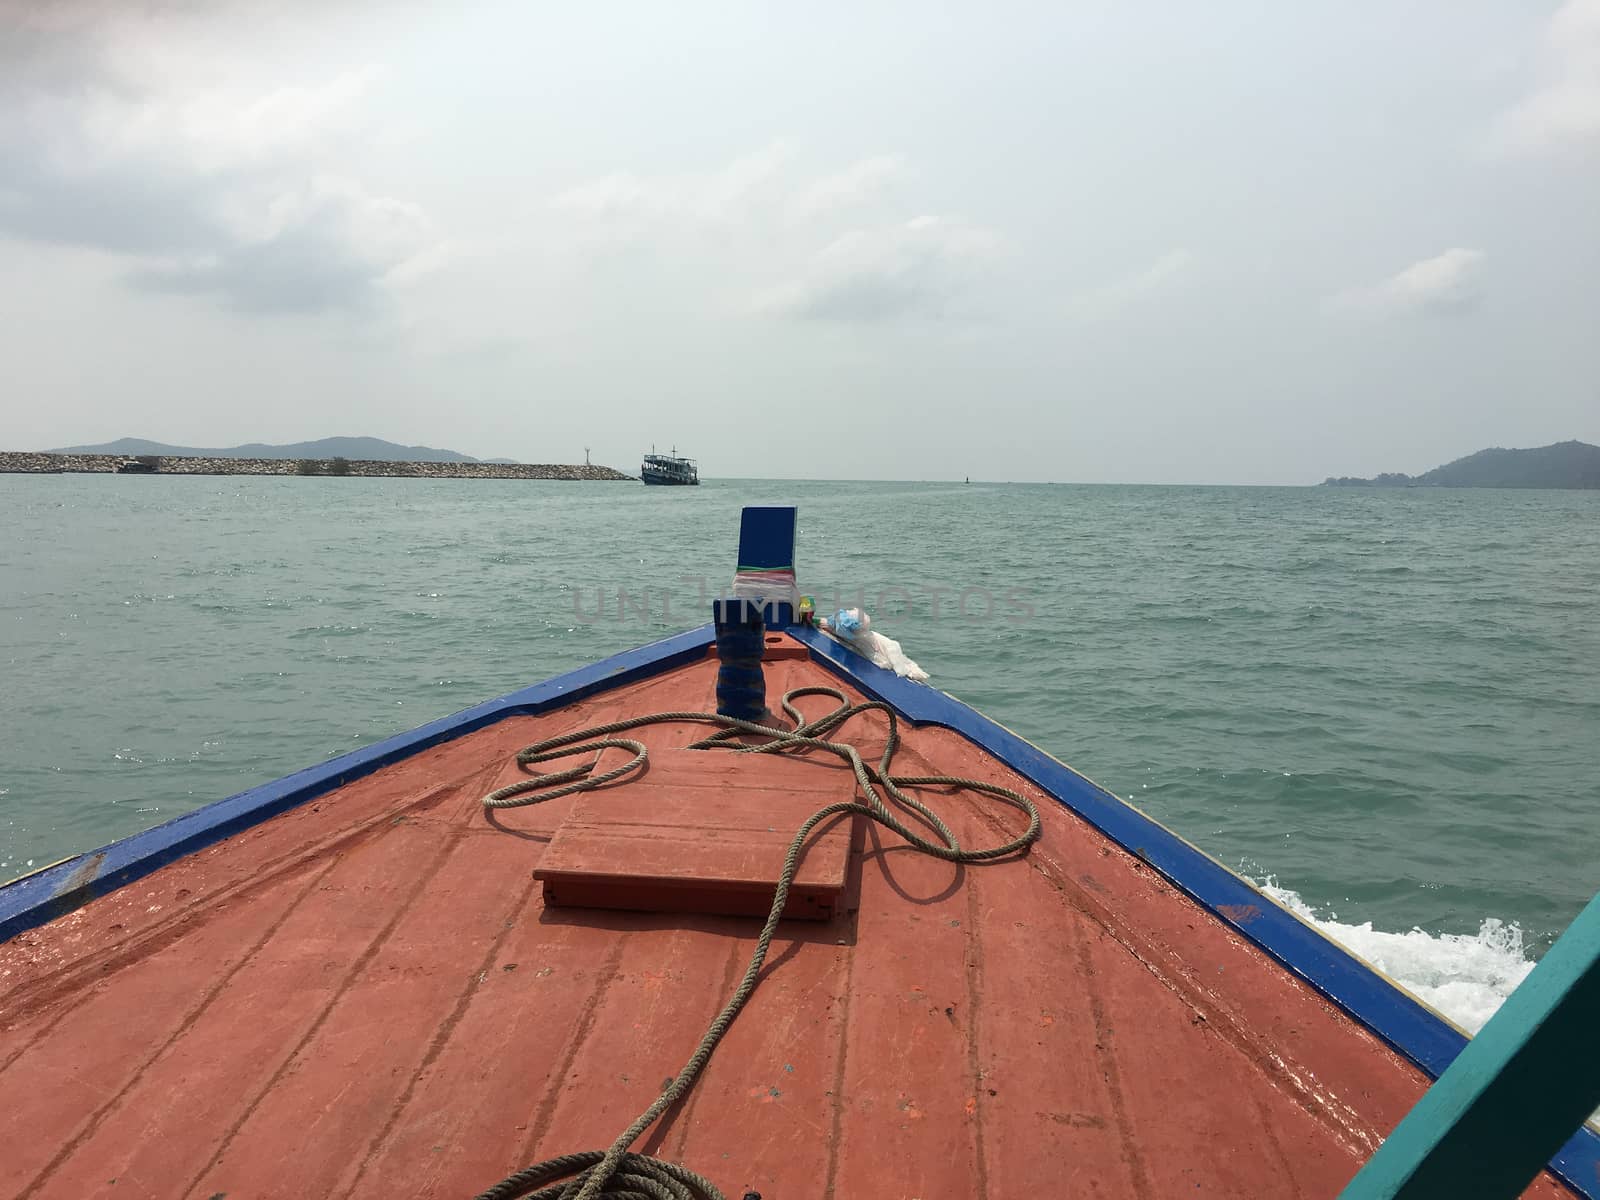 On the way to Koh samet island by local wood boat - At Thailand